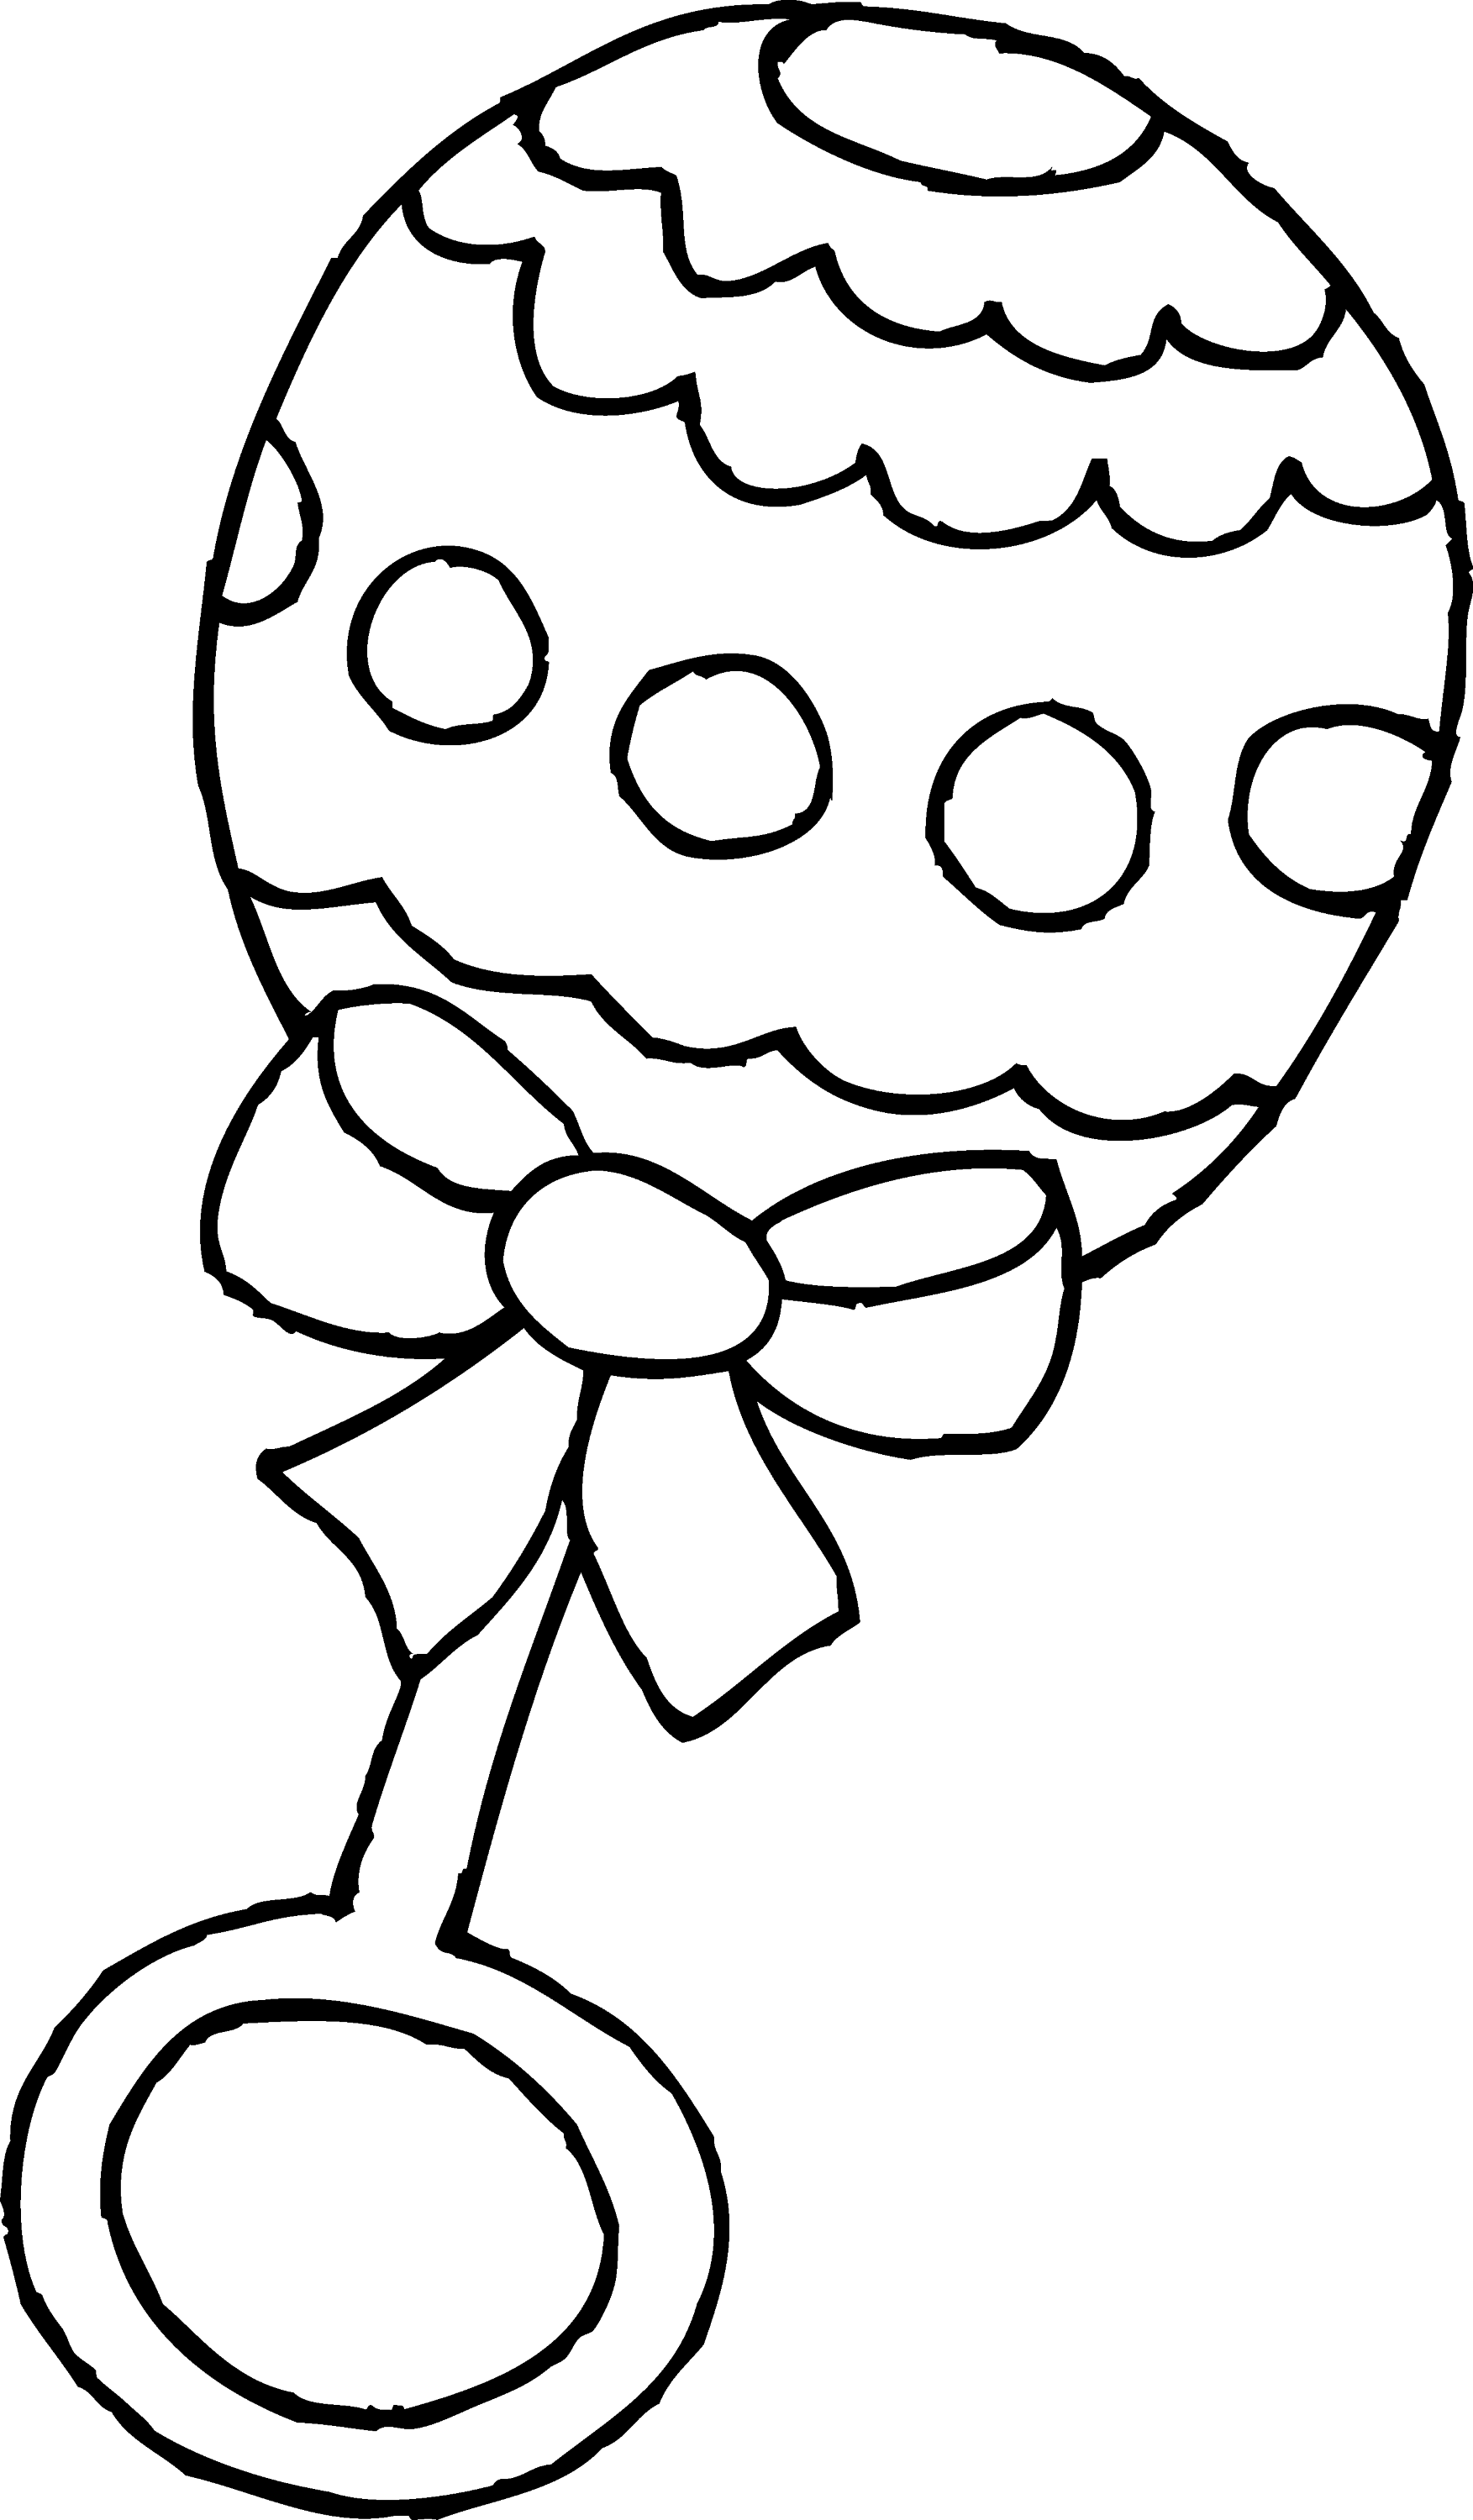 Baby Rattle Coloring Page - Free Clip Art